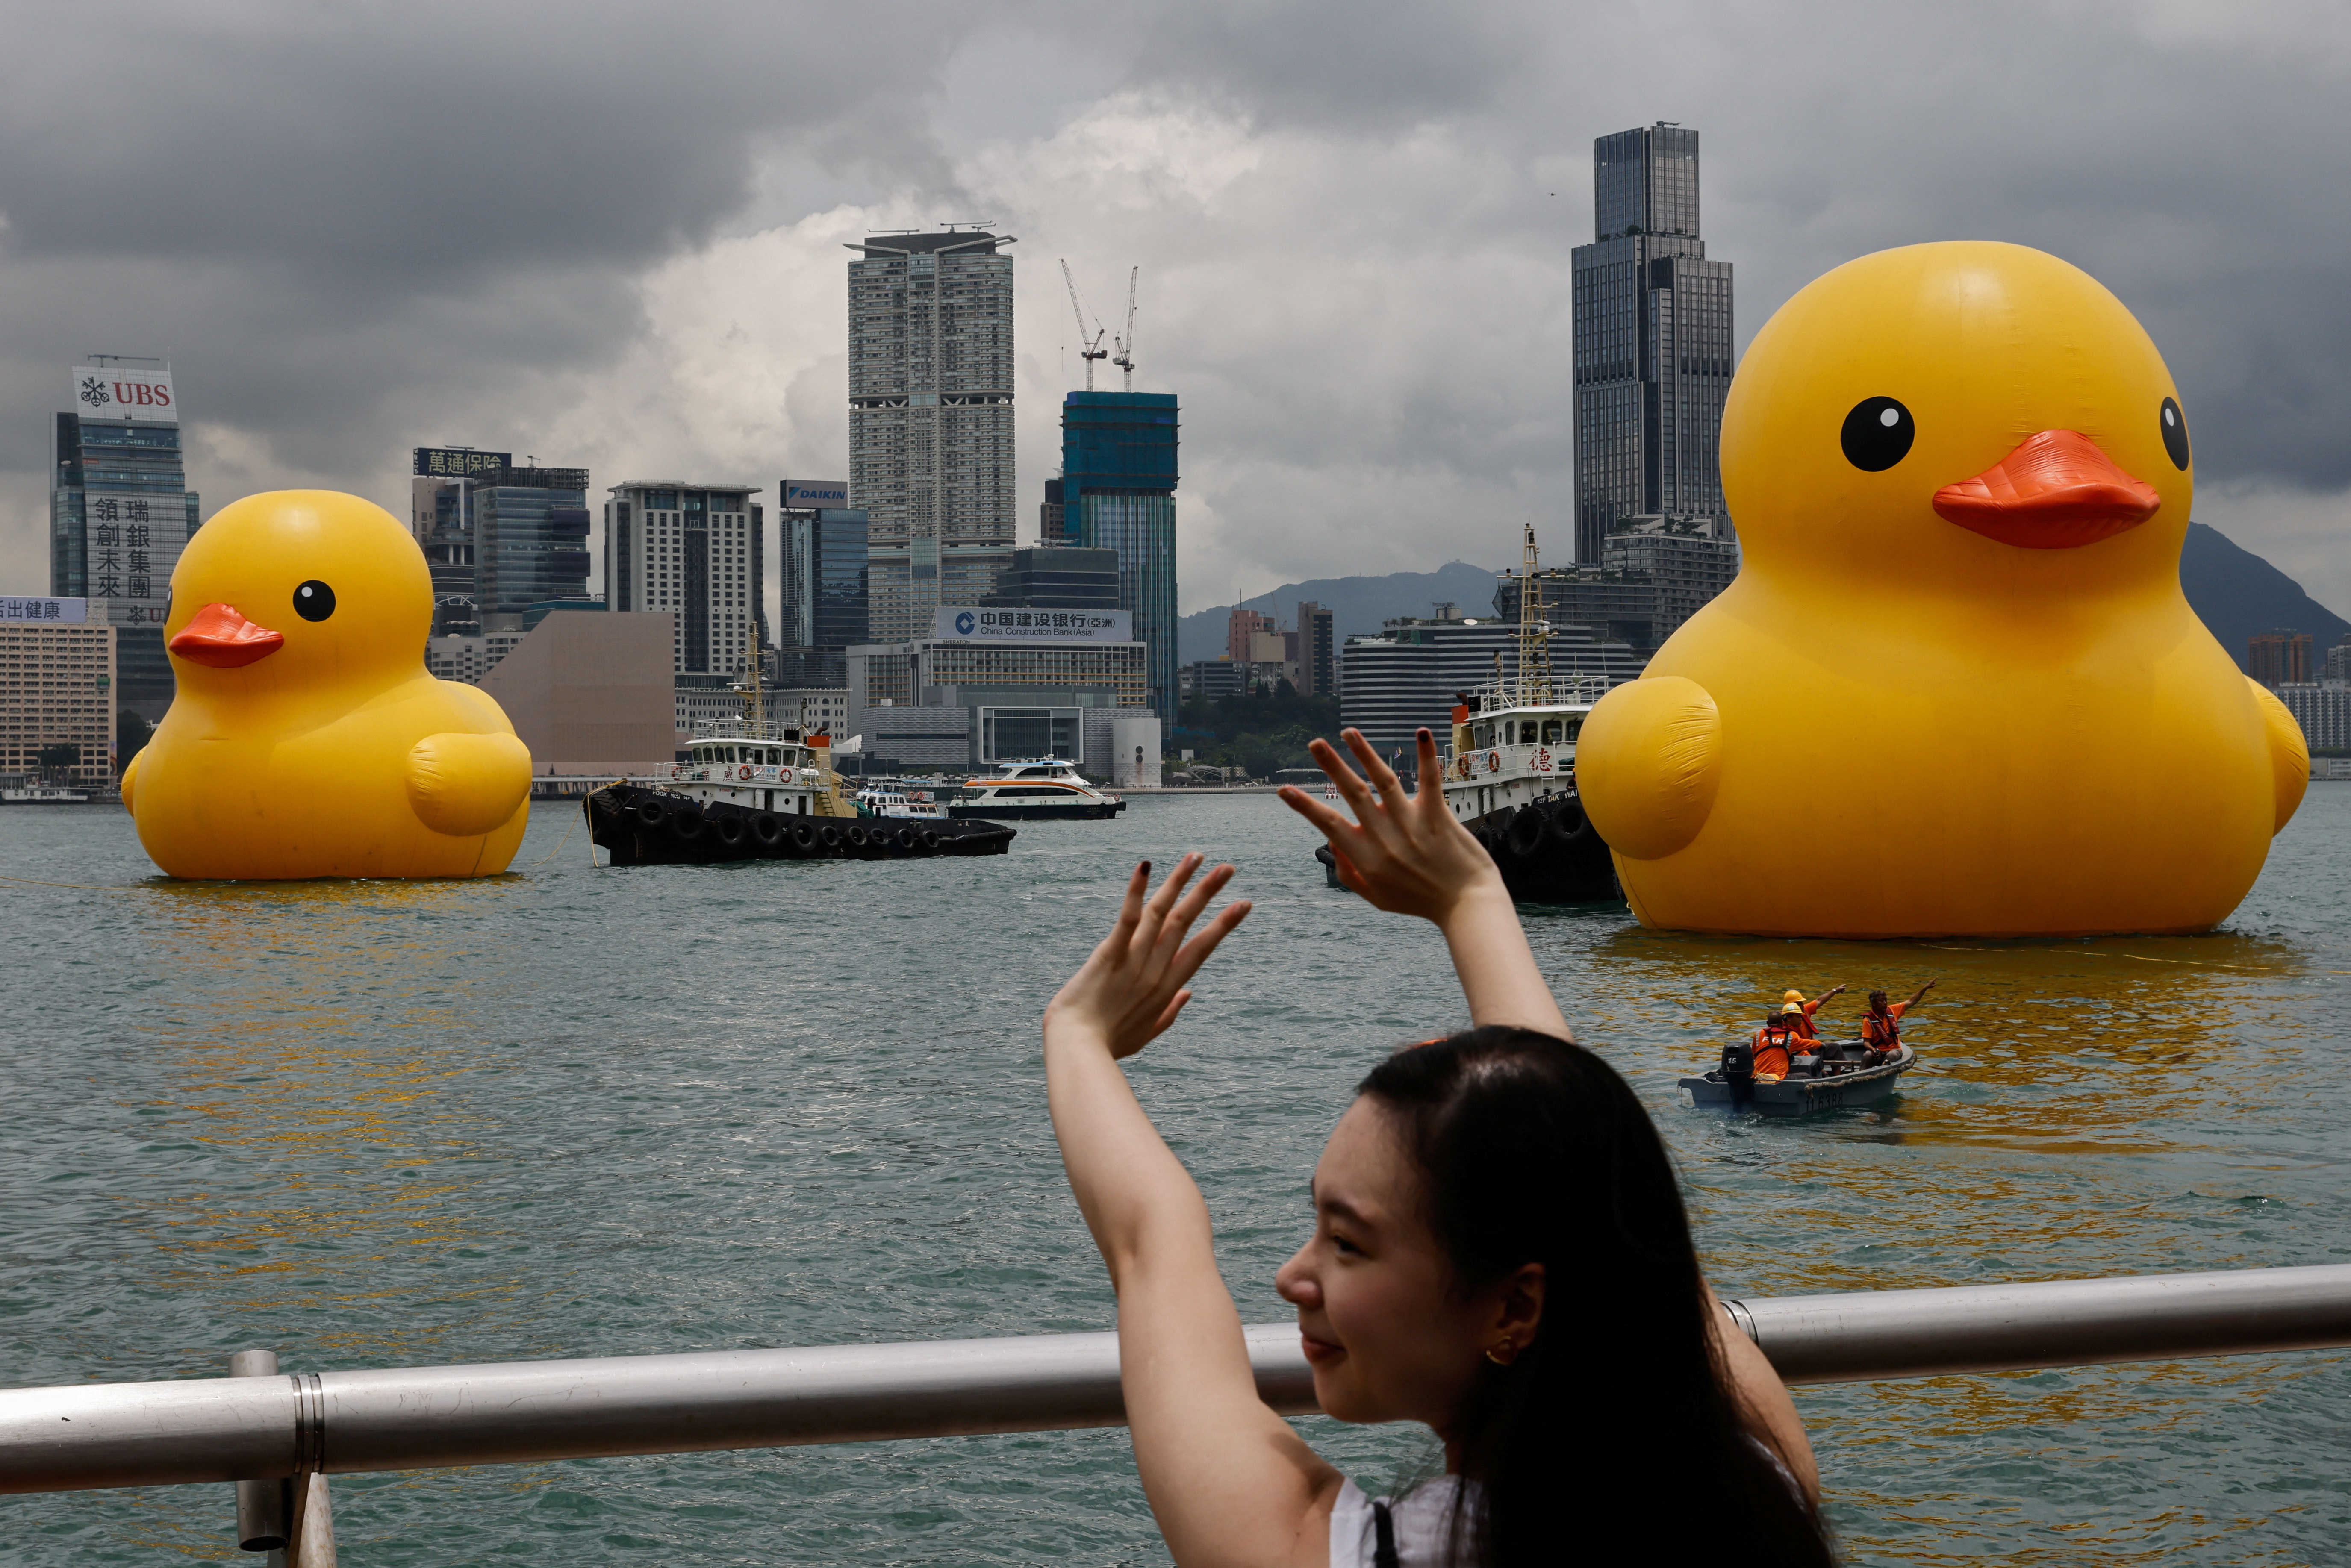 Kindness Duck Project Party with World's Largest Rubber Duck, rubber duck